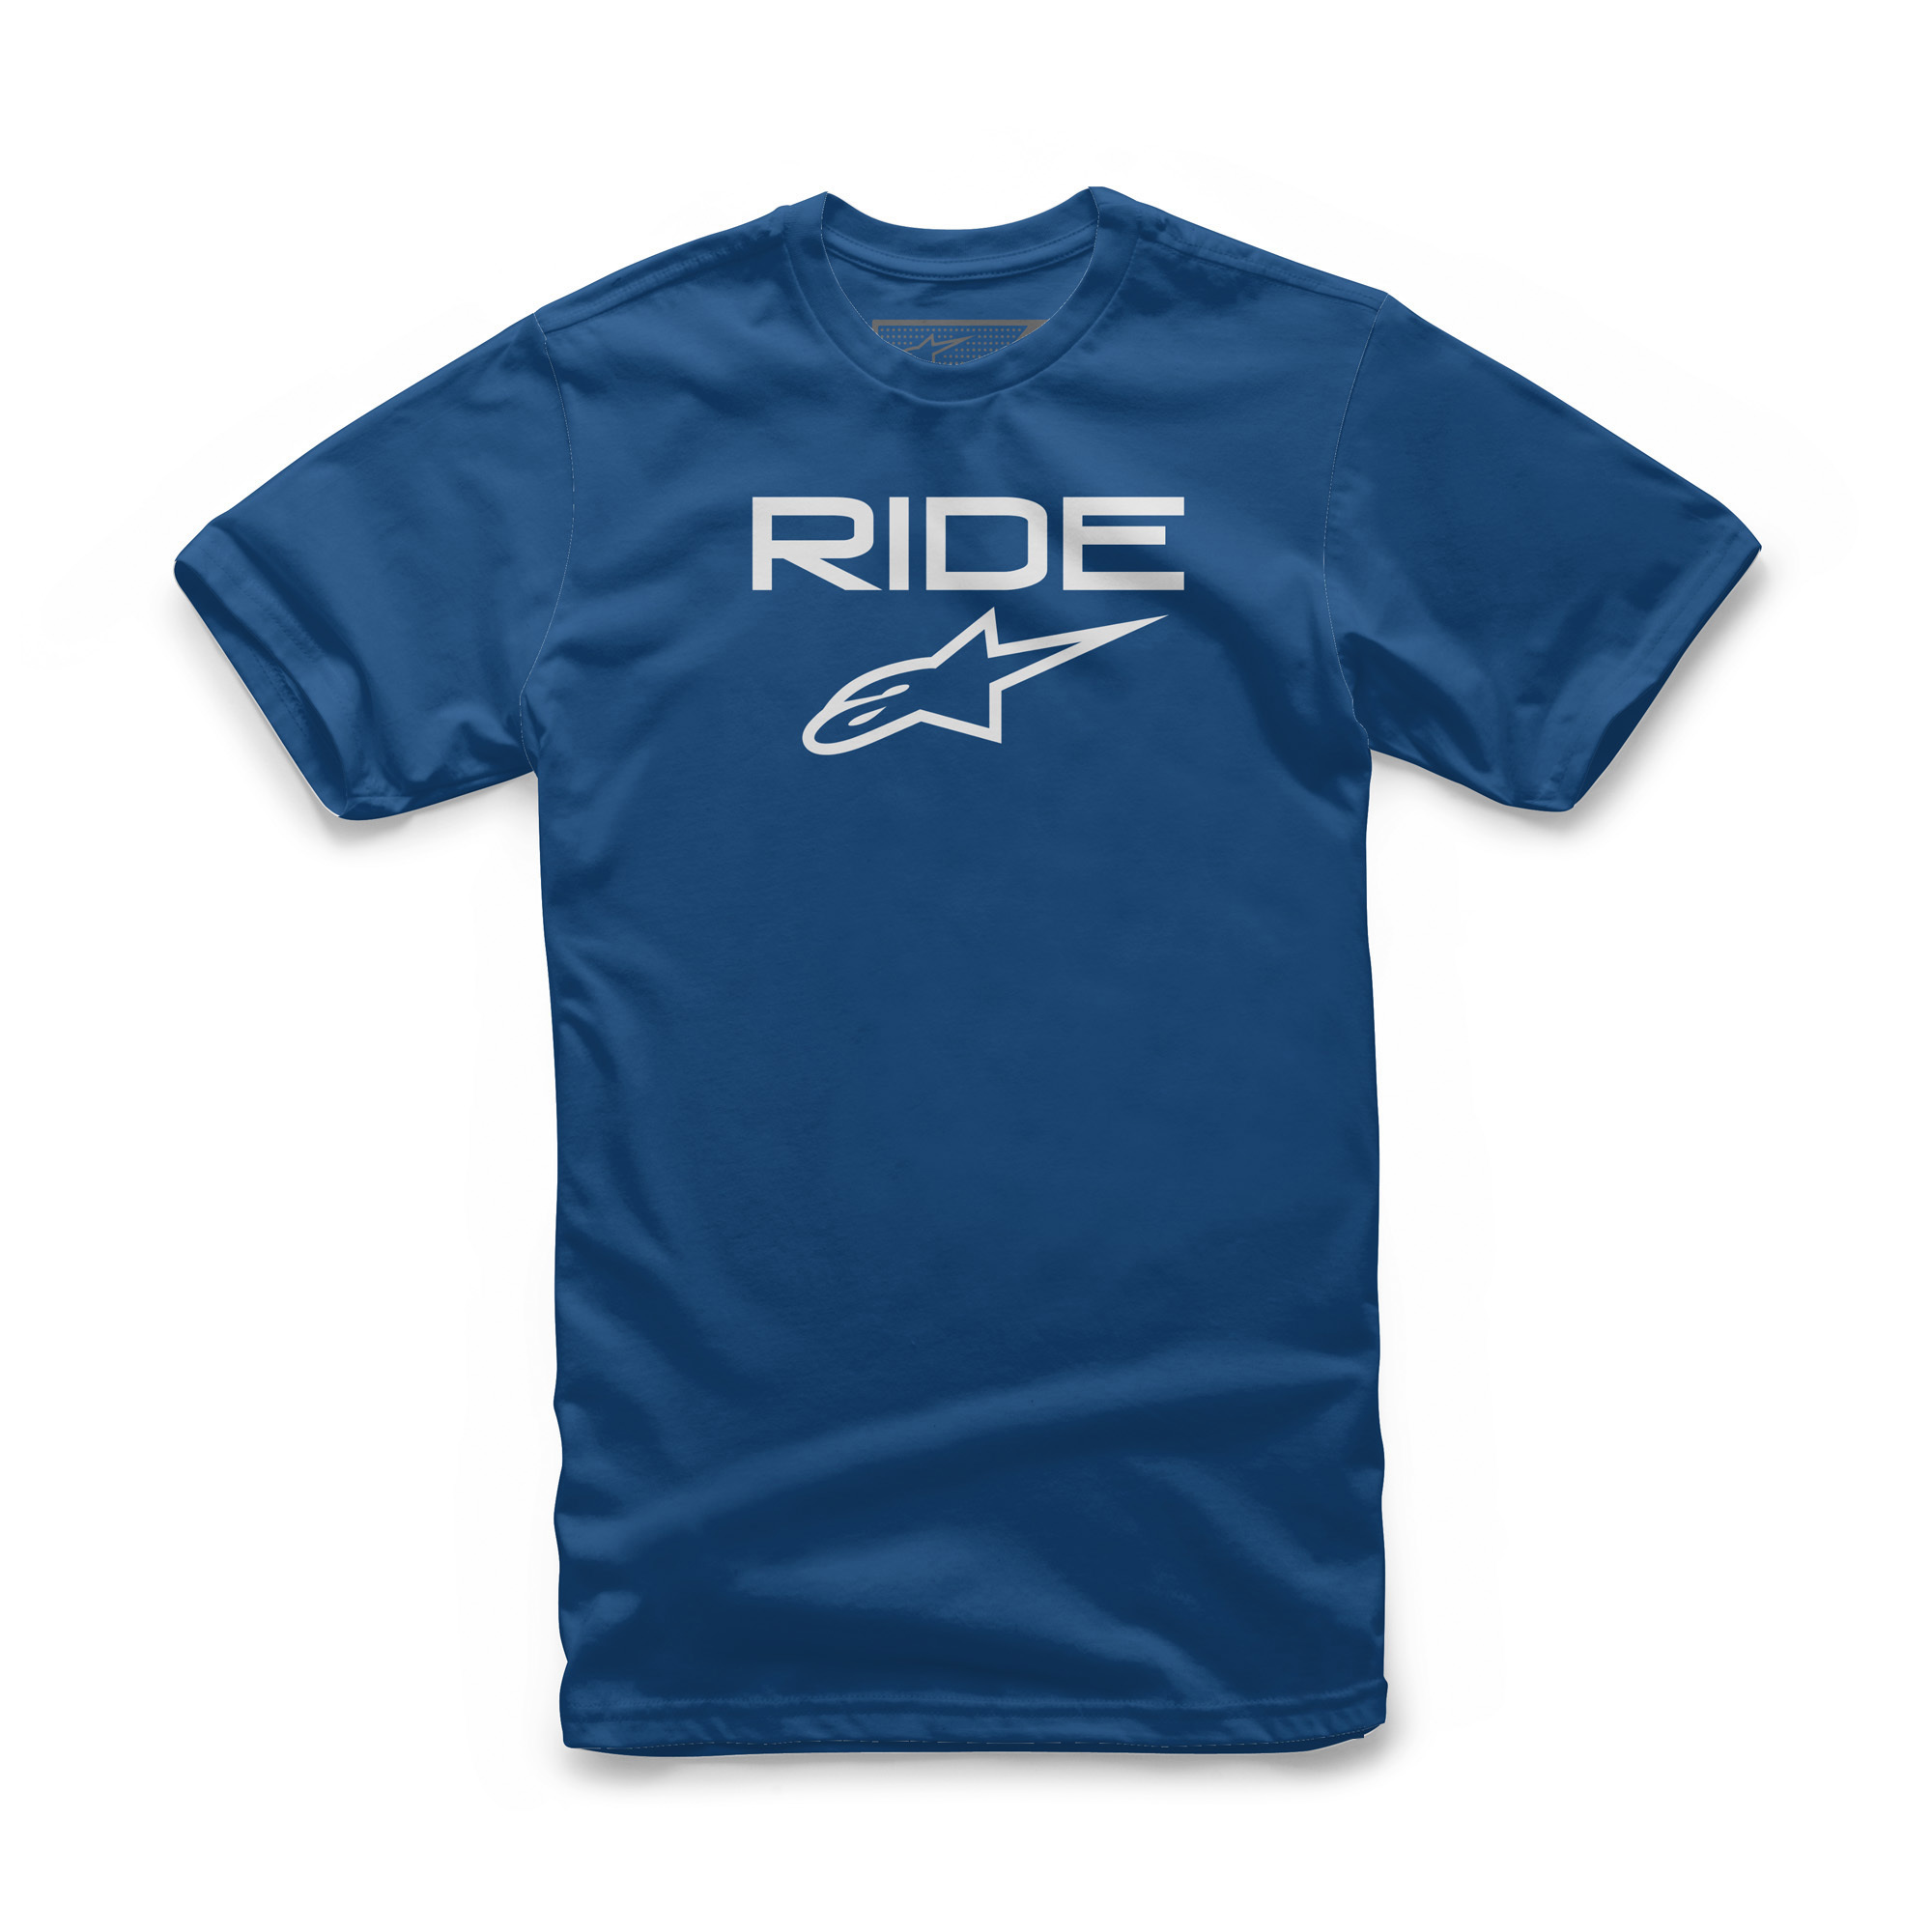 Ride 2.0 Tee Royal Blue/White Large - Click Image to Close